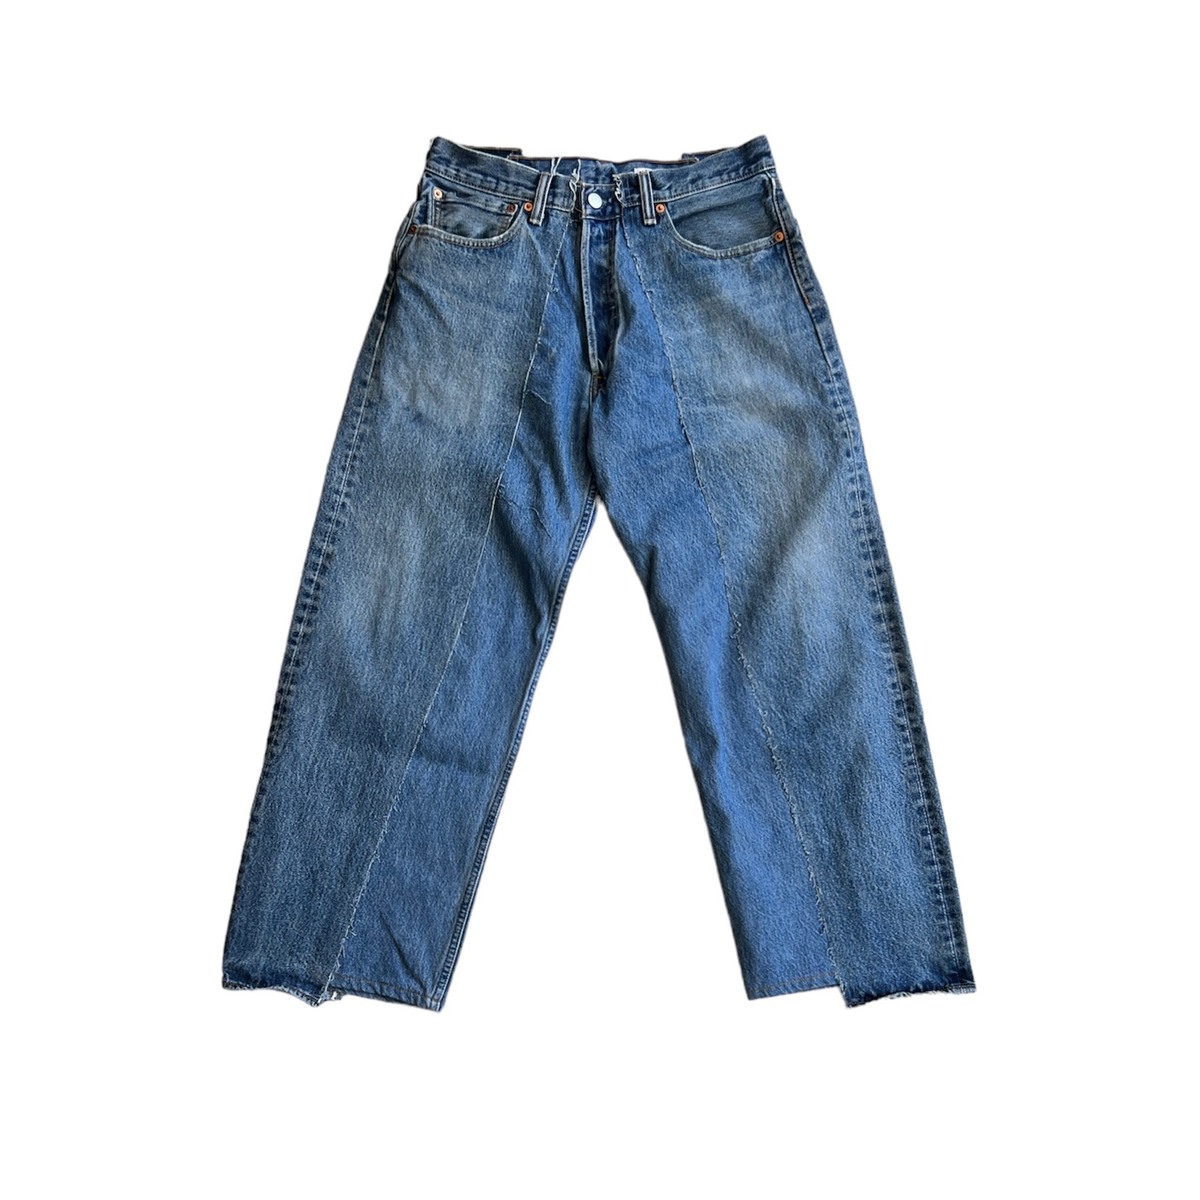 OLDPARK baggy jeans blue-M - 画像3枚目